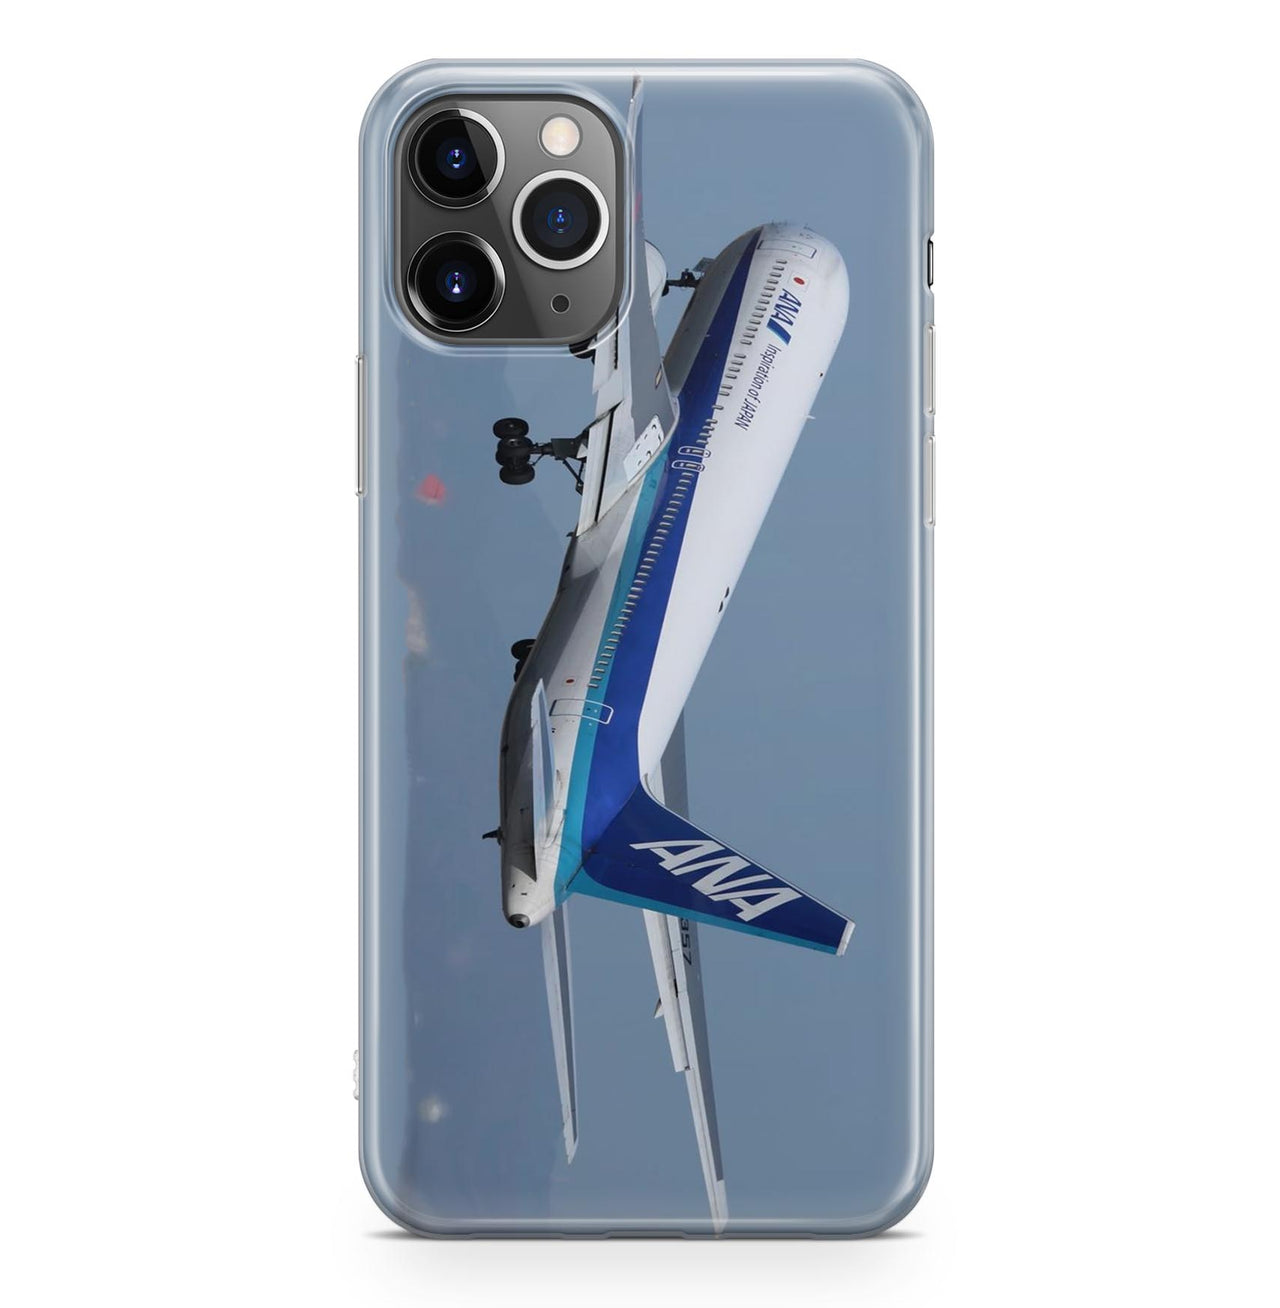 Departing ANA's Boeing 767 Designed iPhone Cases